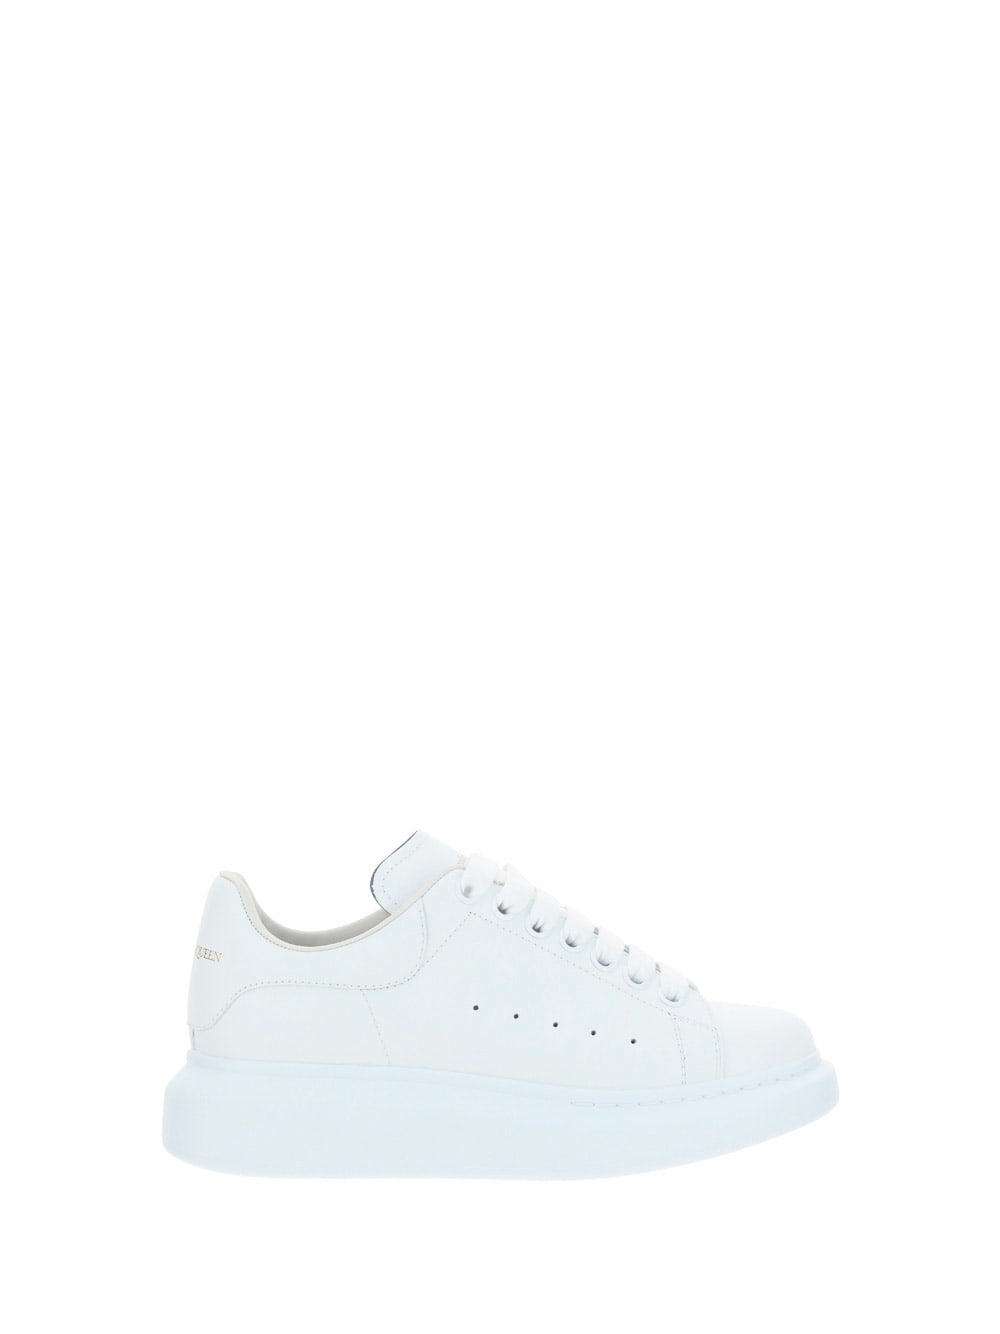 Alexander McQueen Oversized Sneakers Made Of Leather